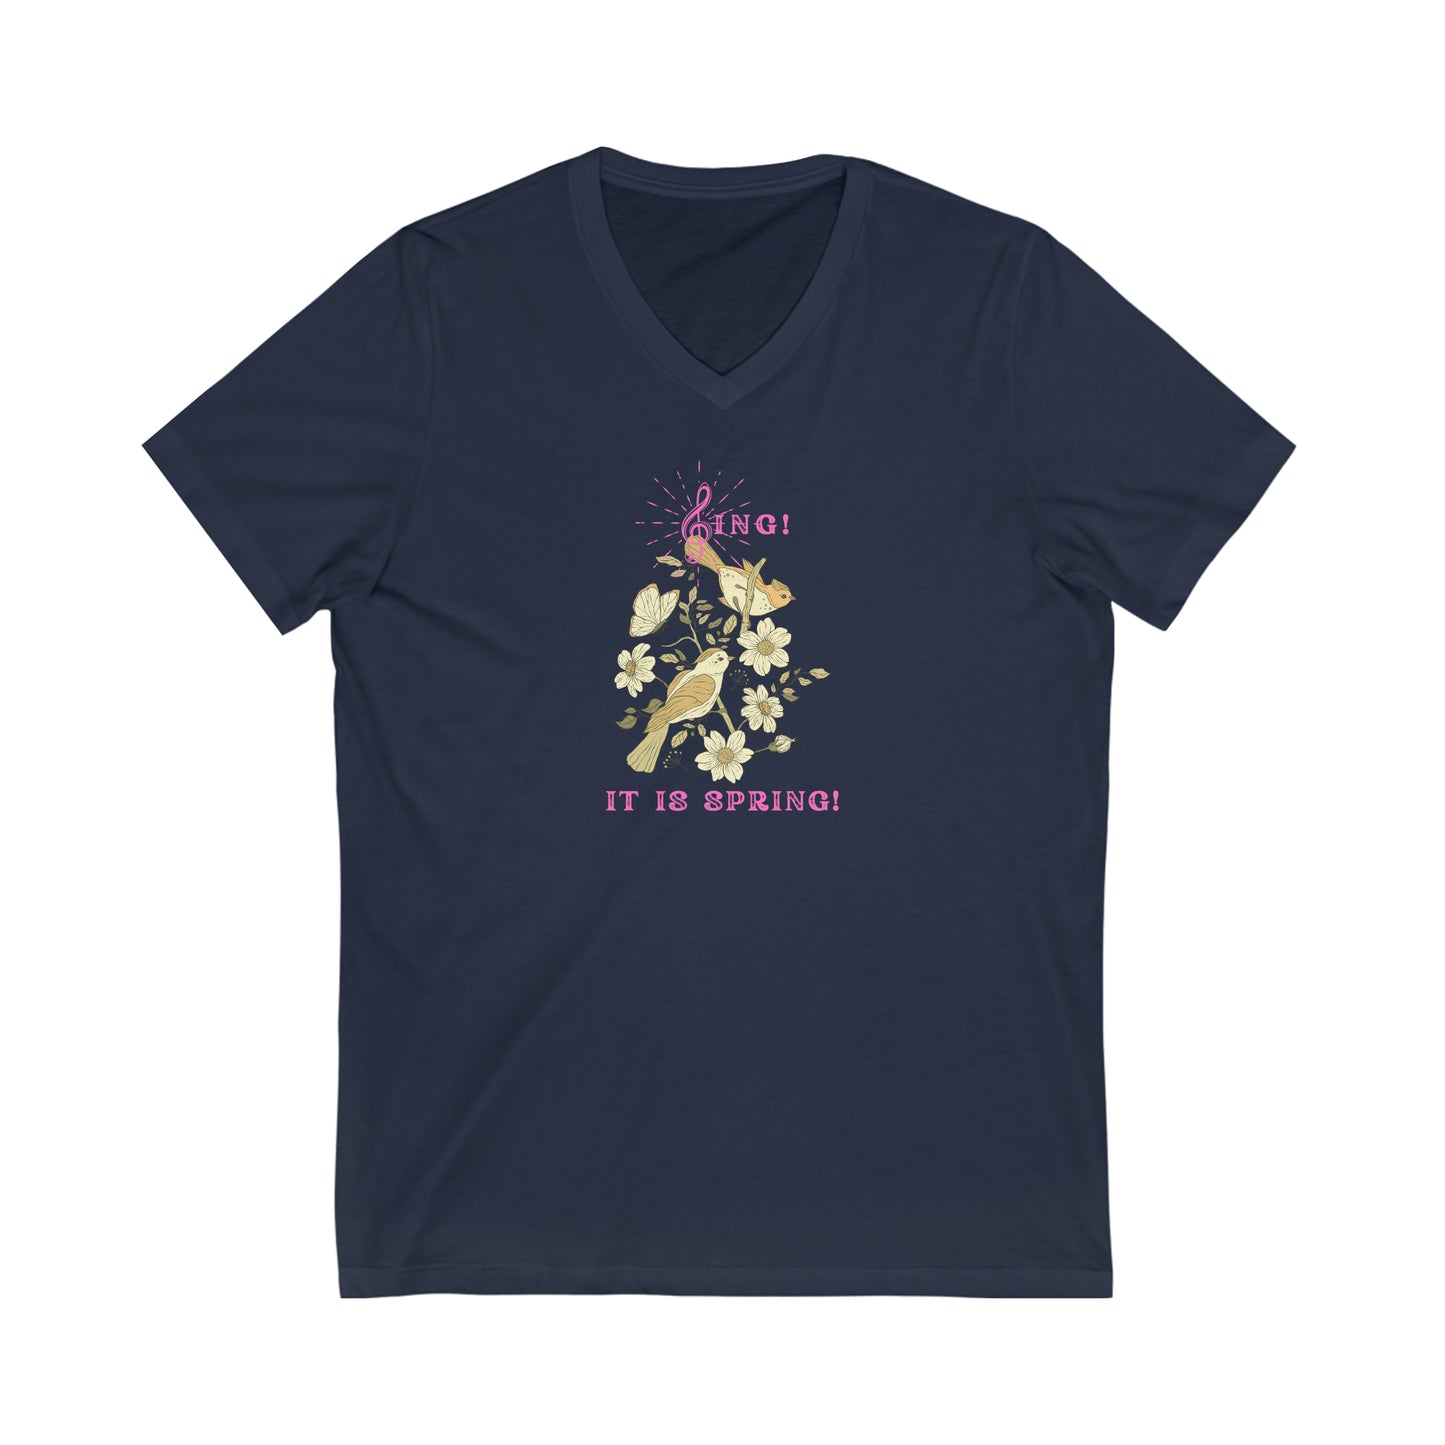 SING IT IS SPRING UNISEX V NECK  T SHIRT GIFT WITH PINK FONT